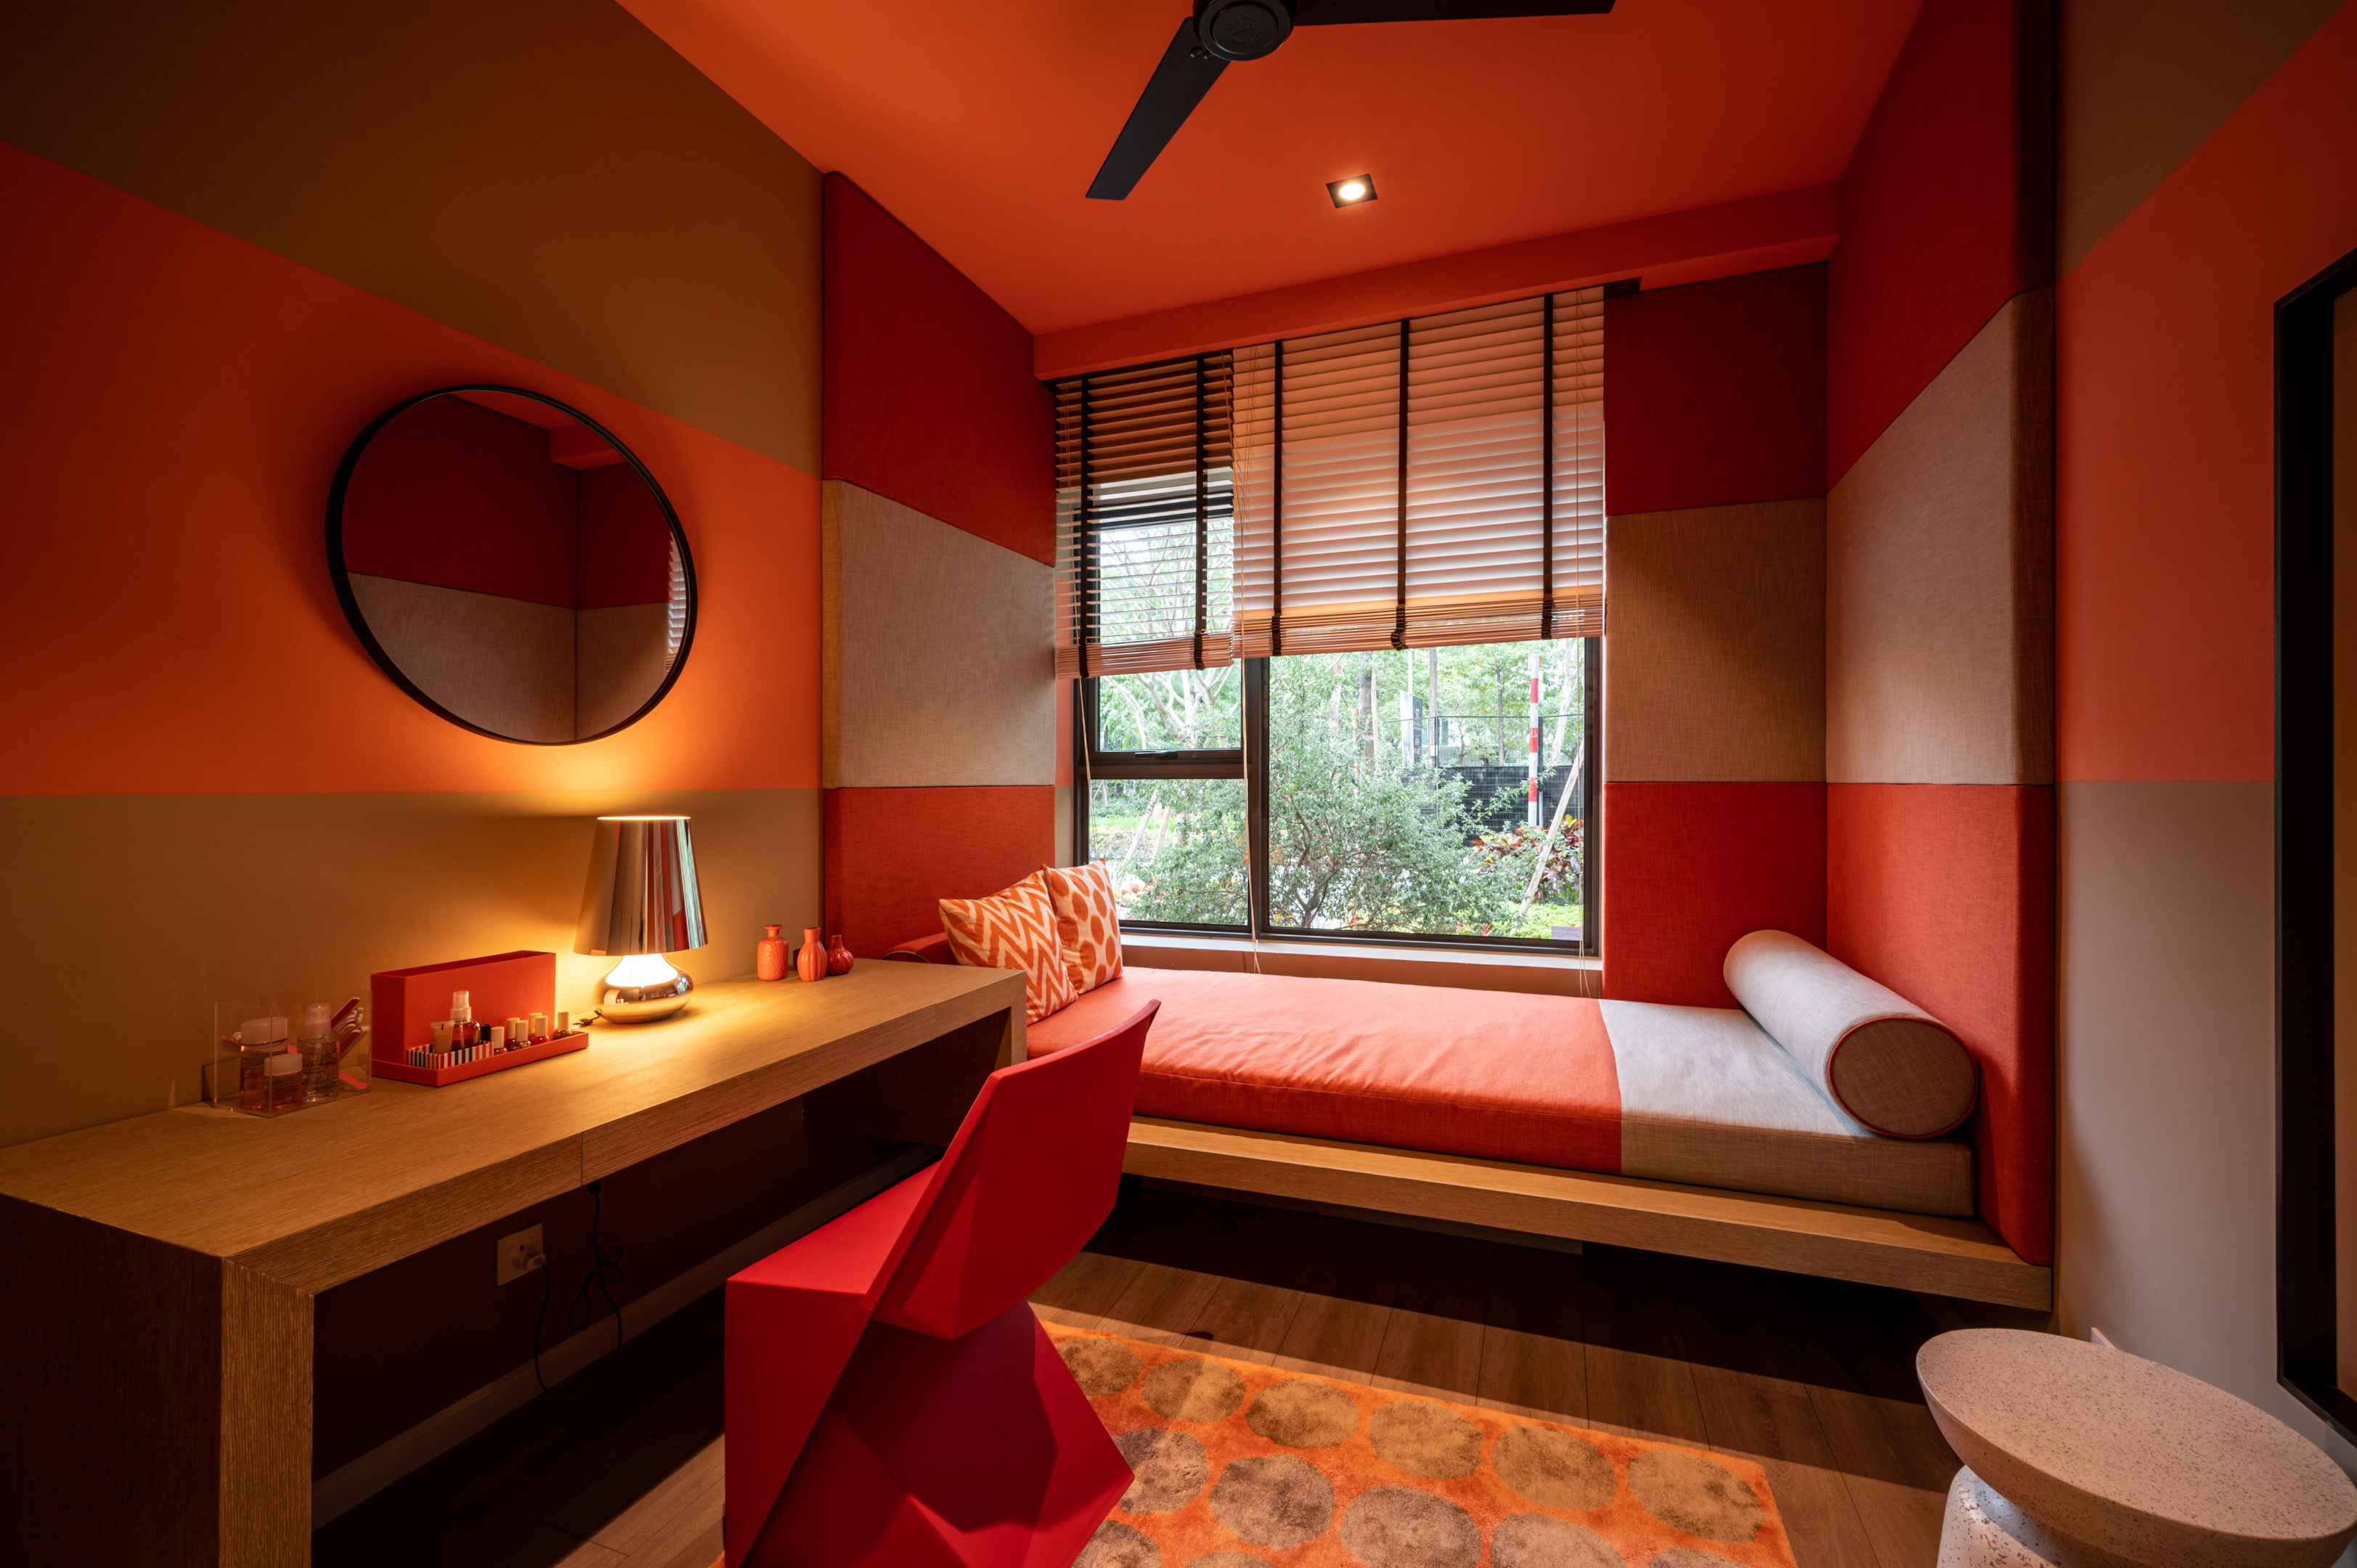 Red Room for Love and Romantic / Photo by Huy Nguyen on Unsplash